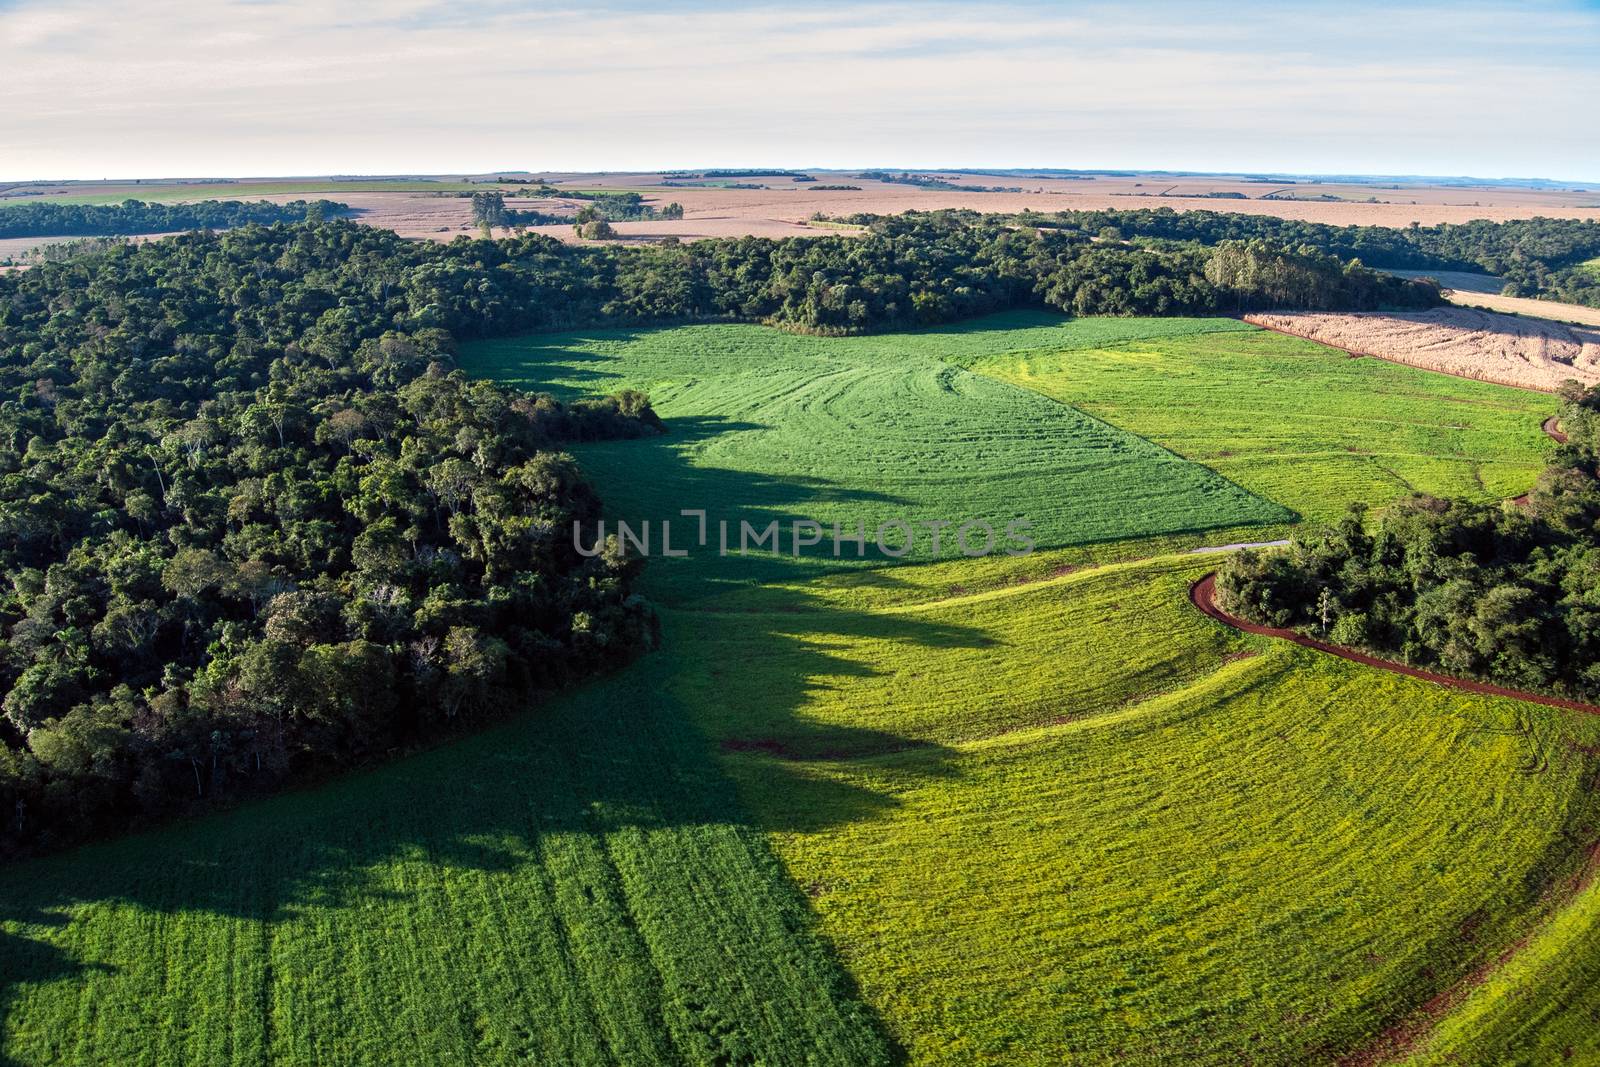 Conversion of atlantic rainforest areas into soybean fields.